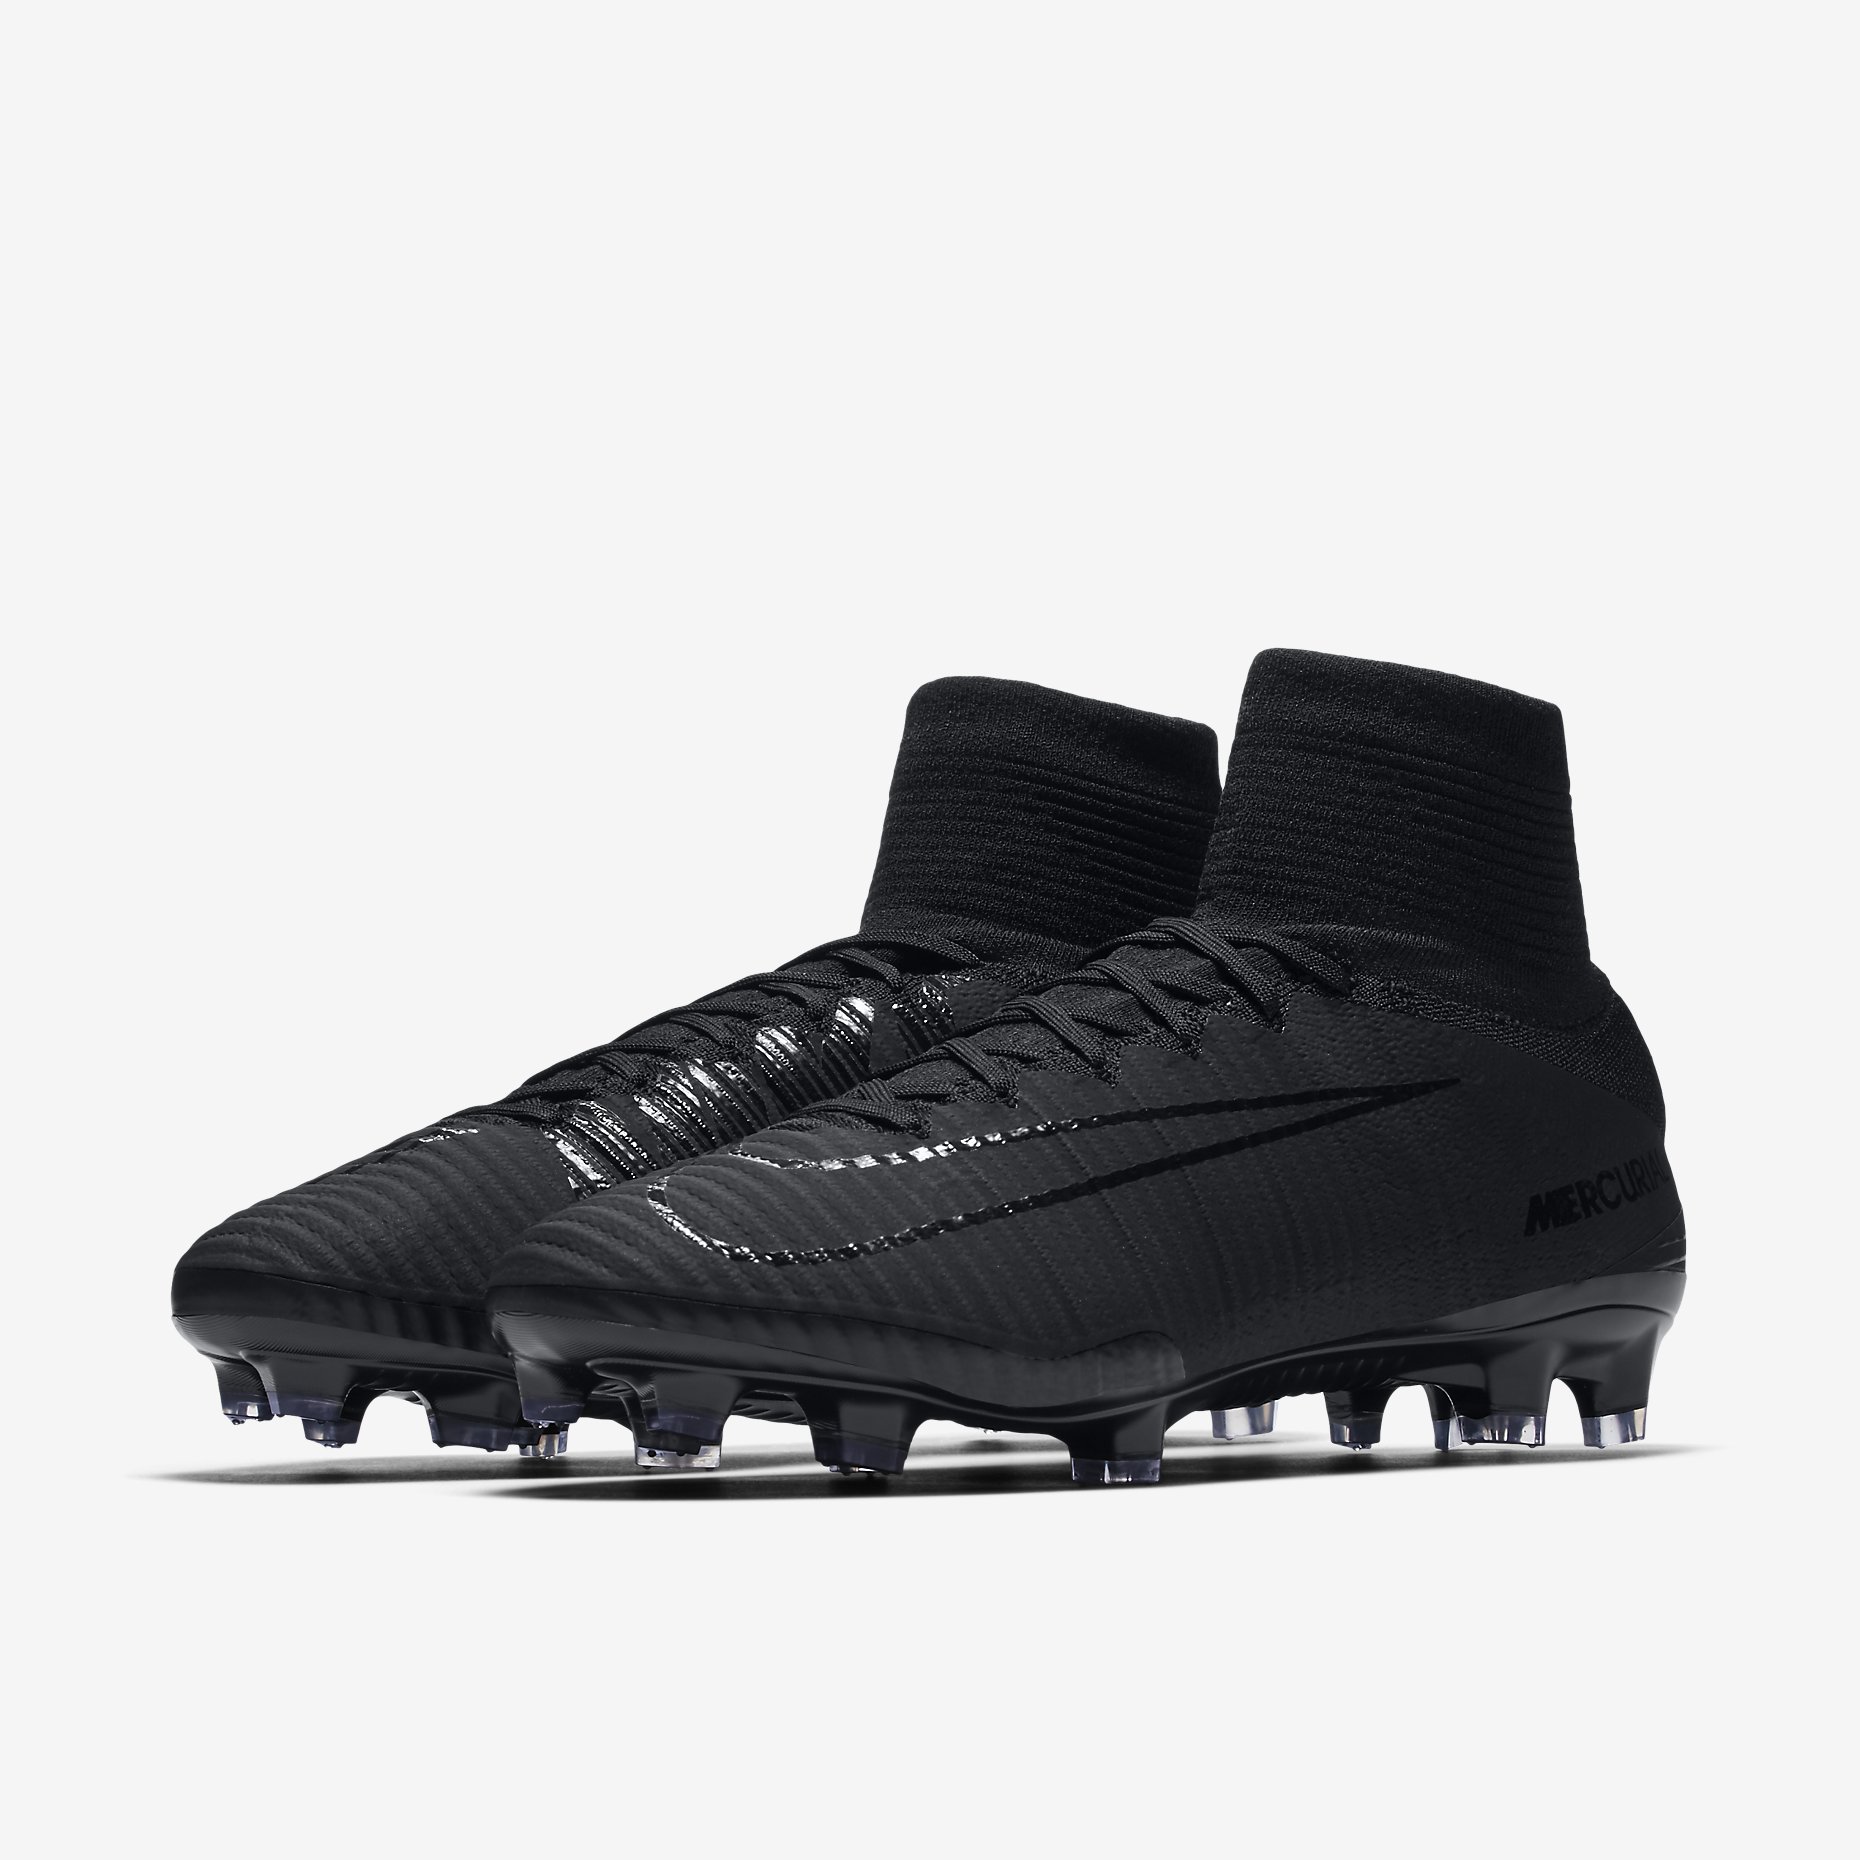 Nike Superfly V FG Academy Pack - Black / Black Football Shirt Culture - Latest Football News and More